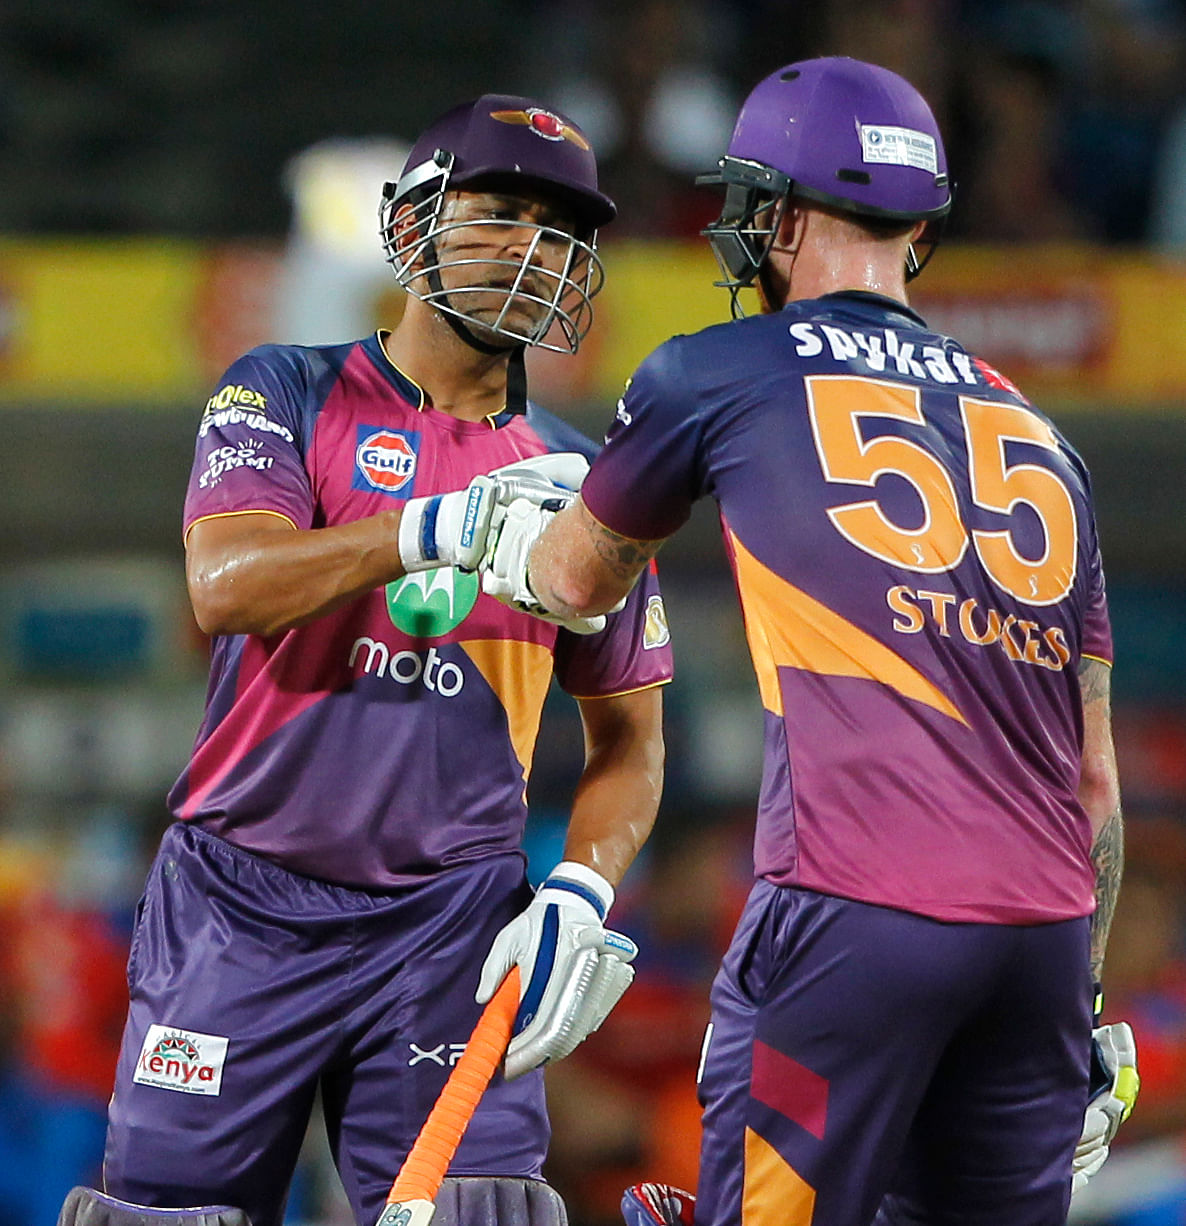 Rising Pune now placed fifth in the standings.